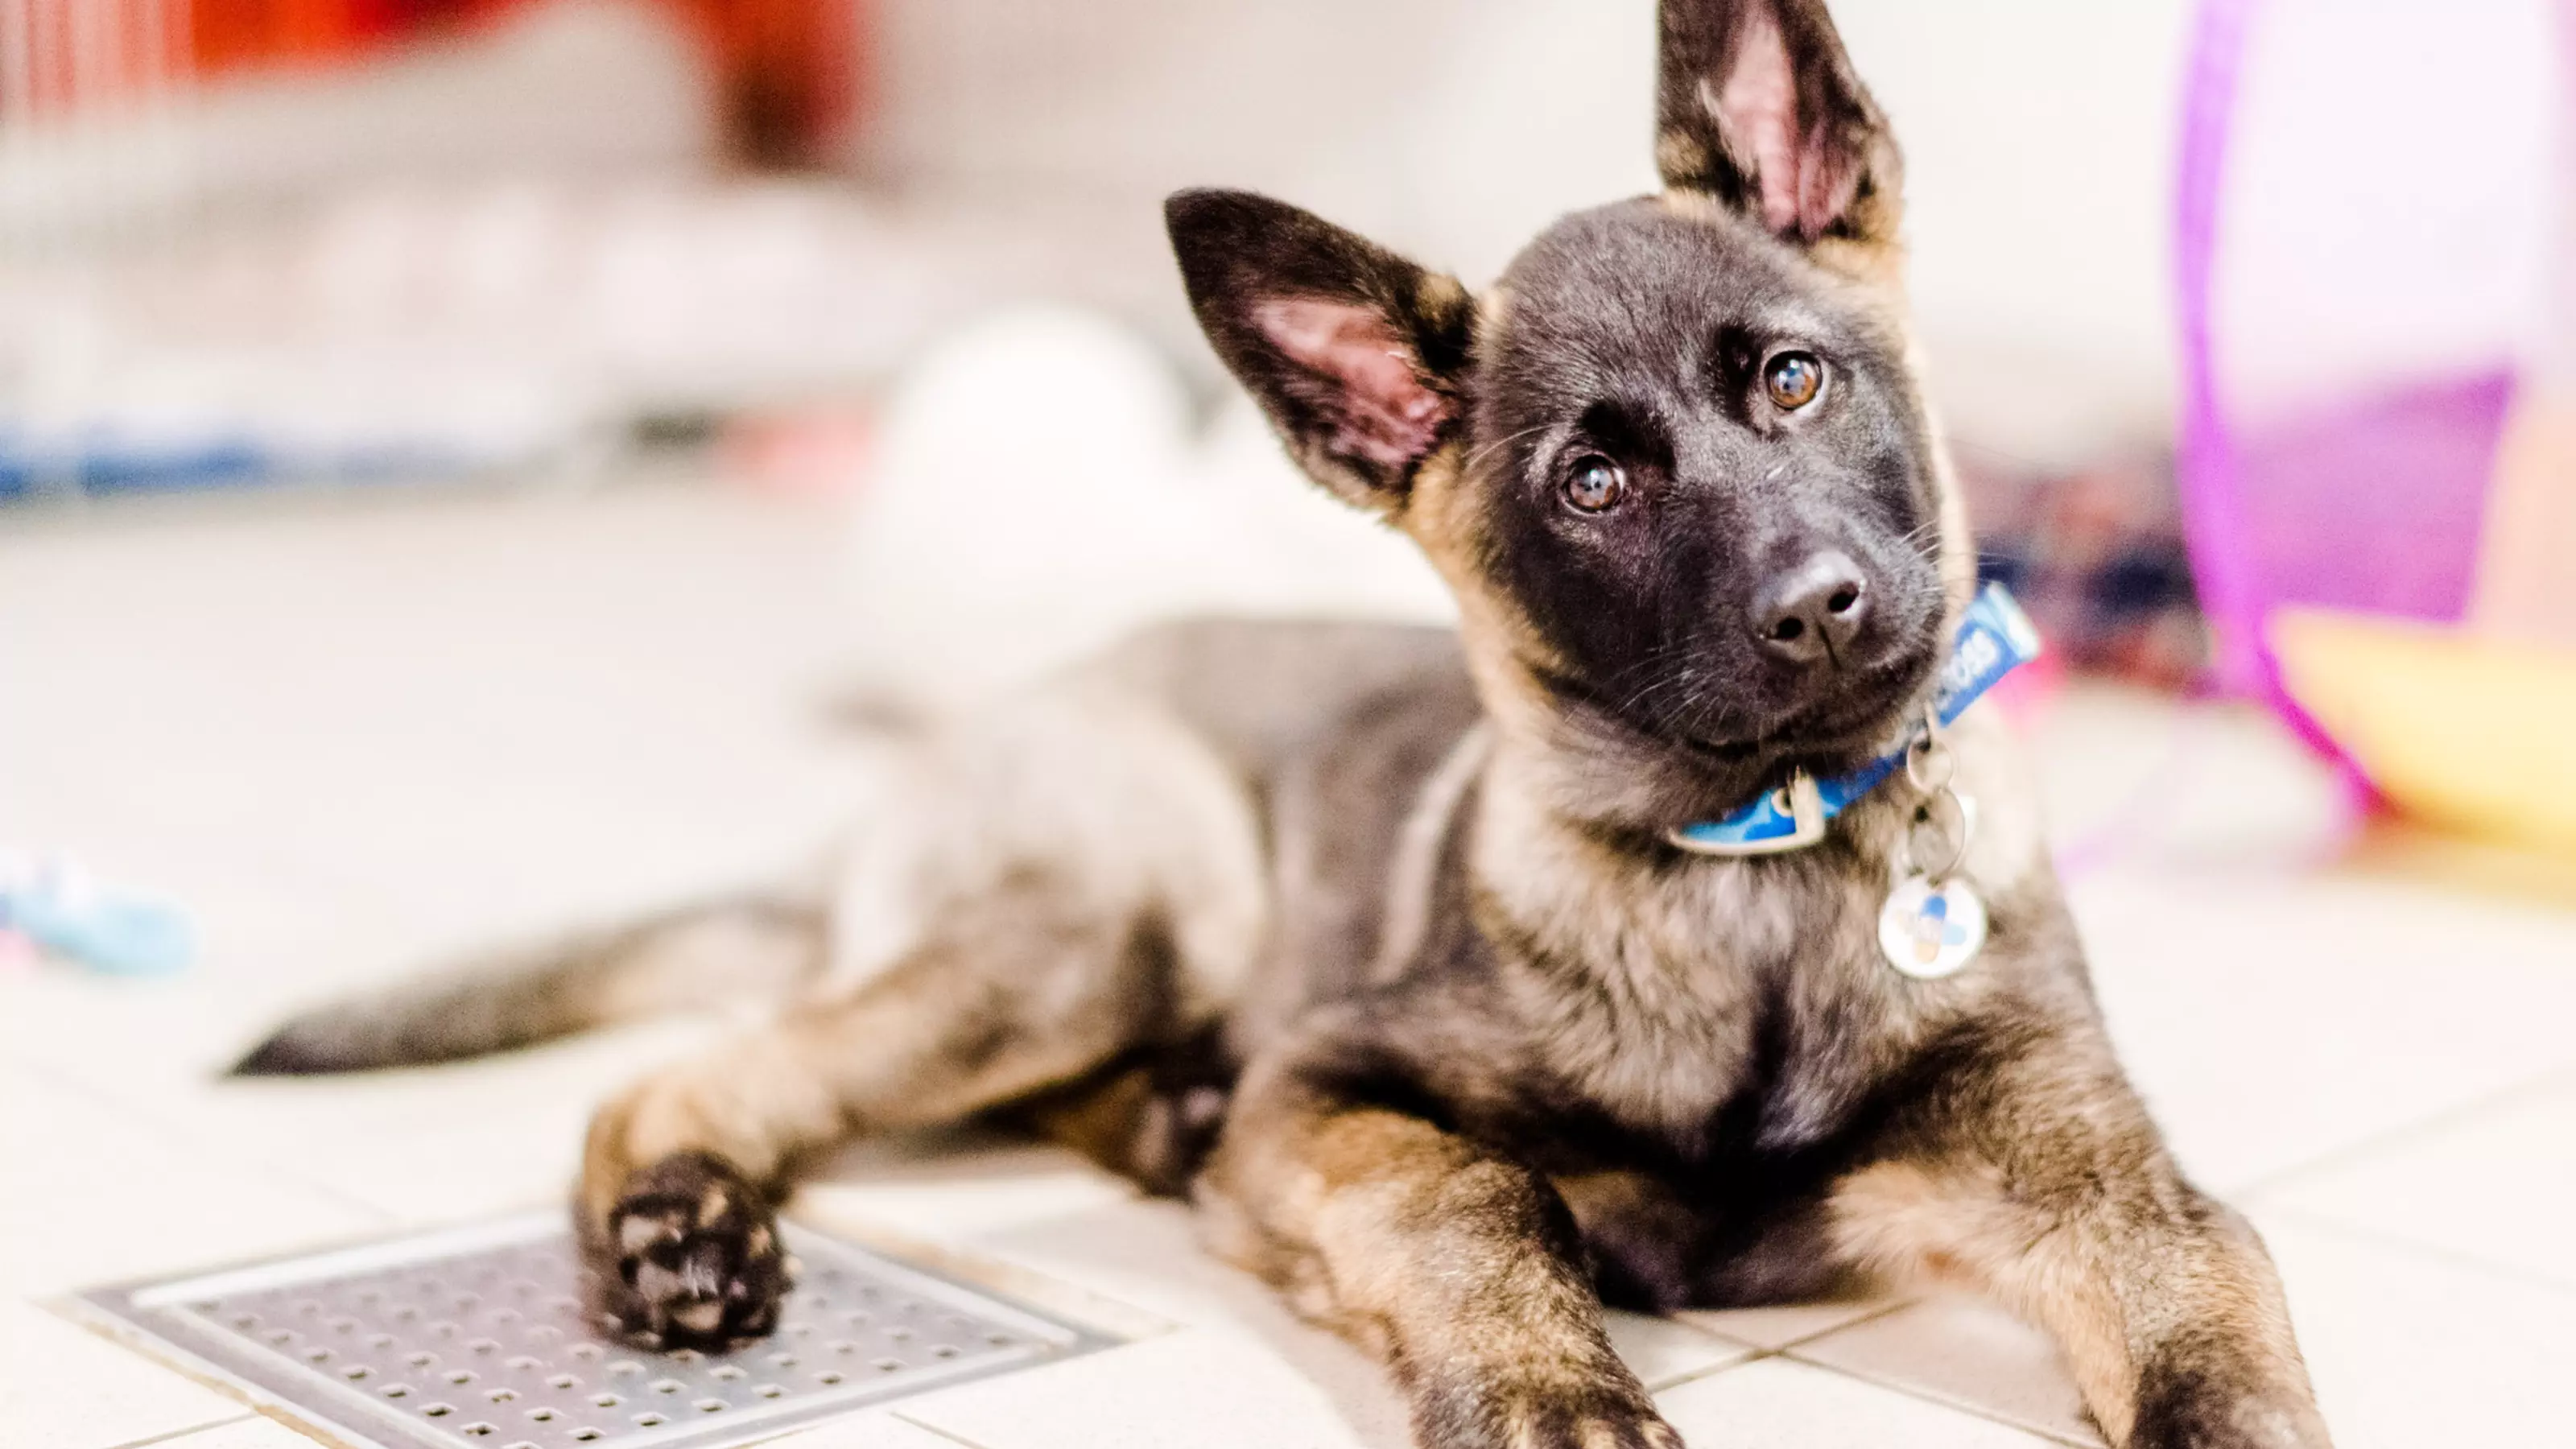 Suzie, the Belgian shepherd puppy, looks at the camera with her head tilted